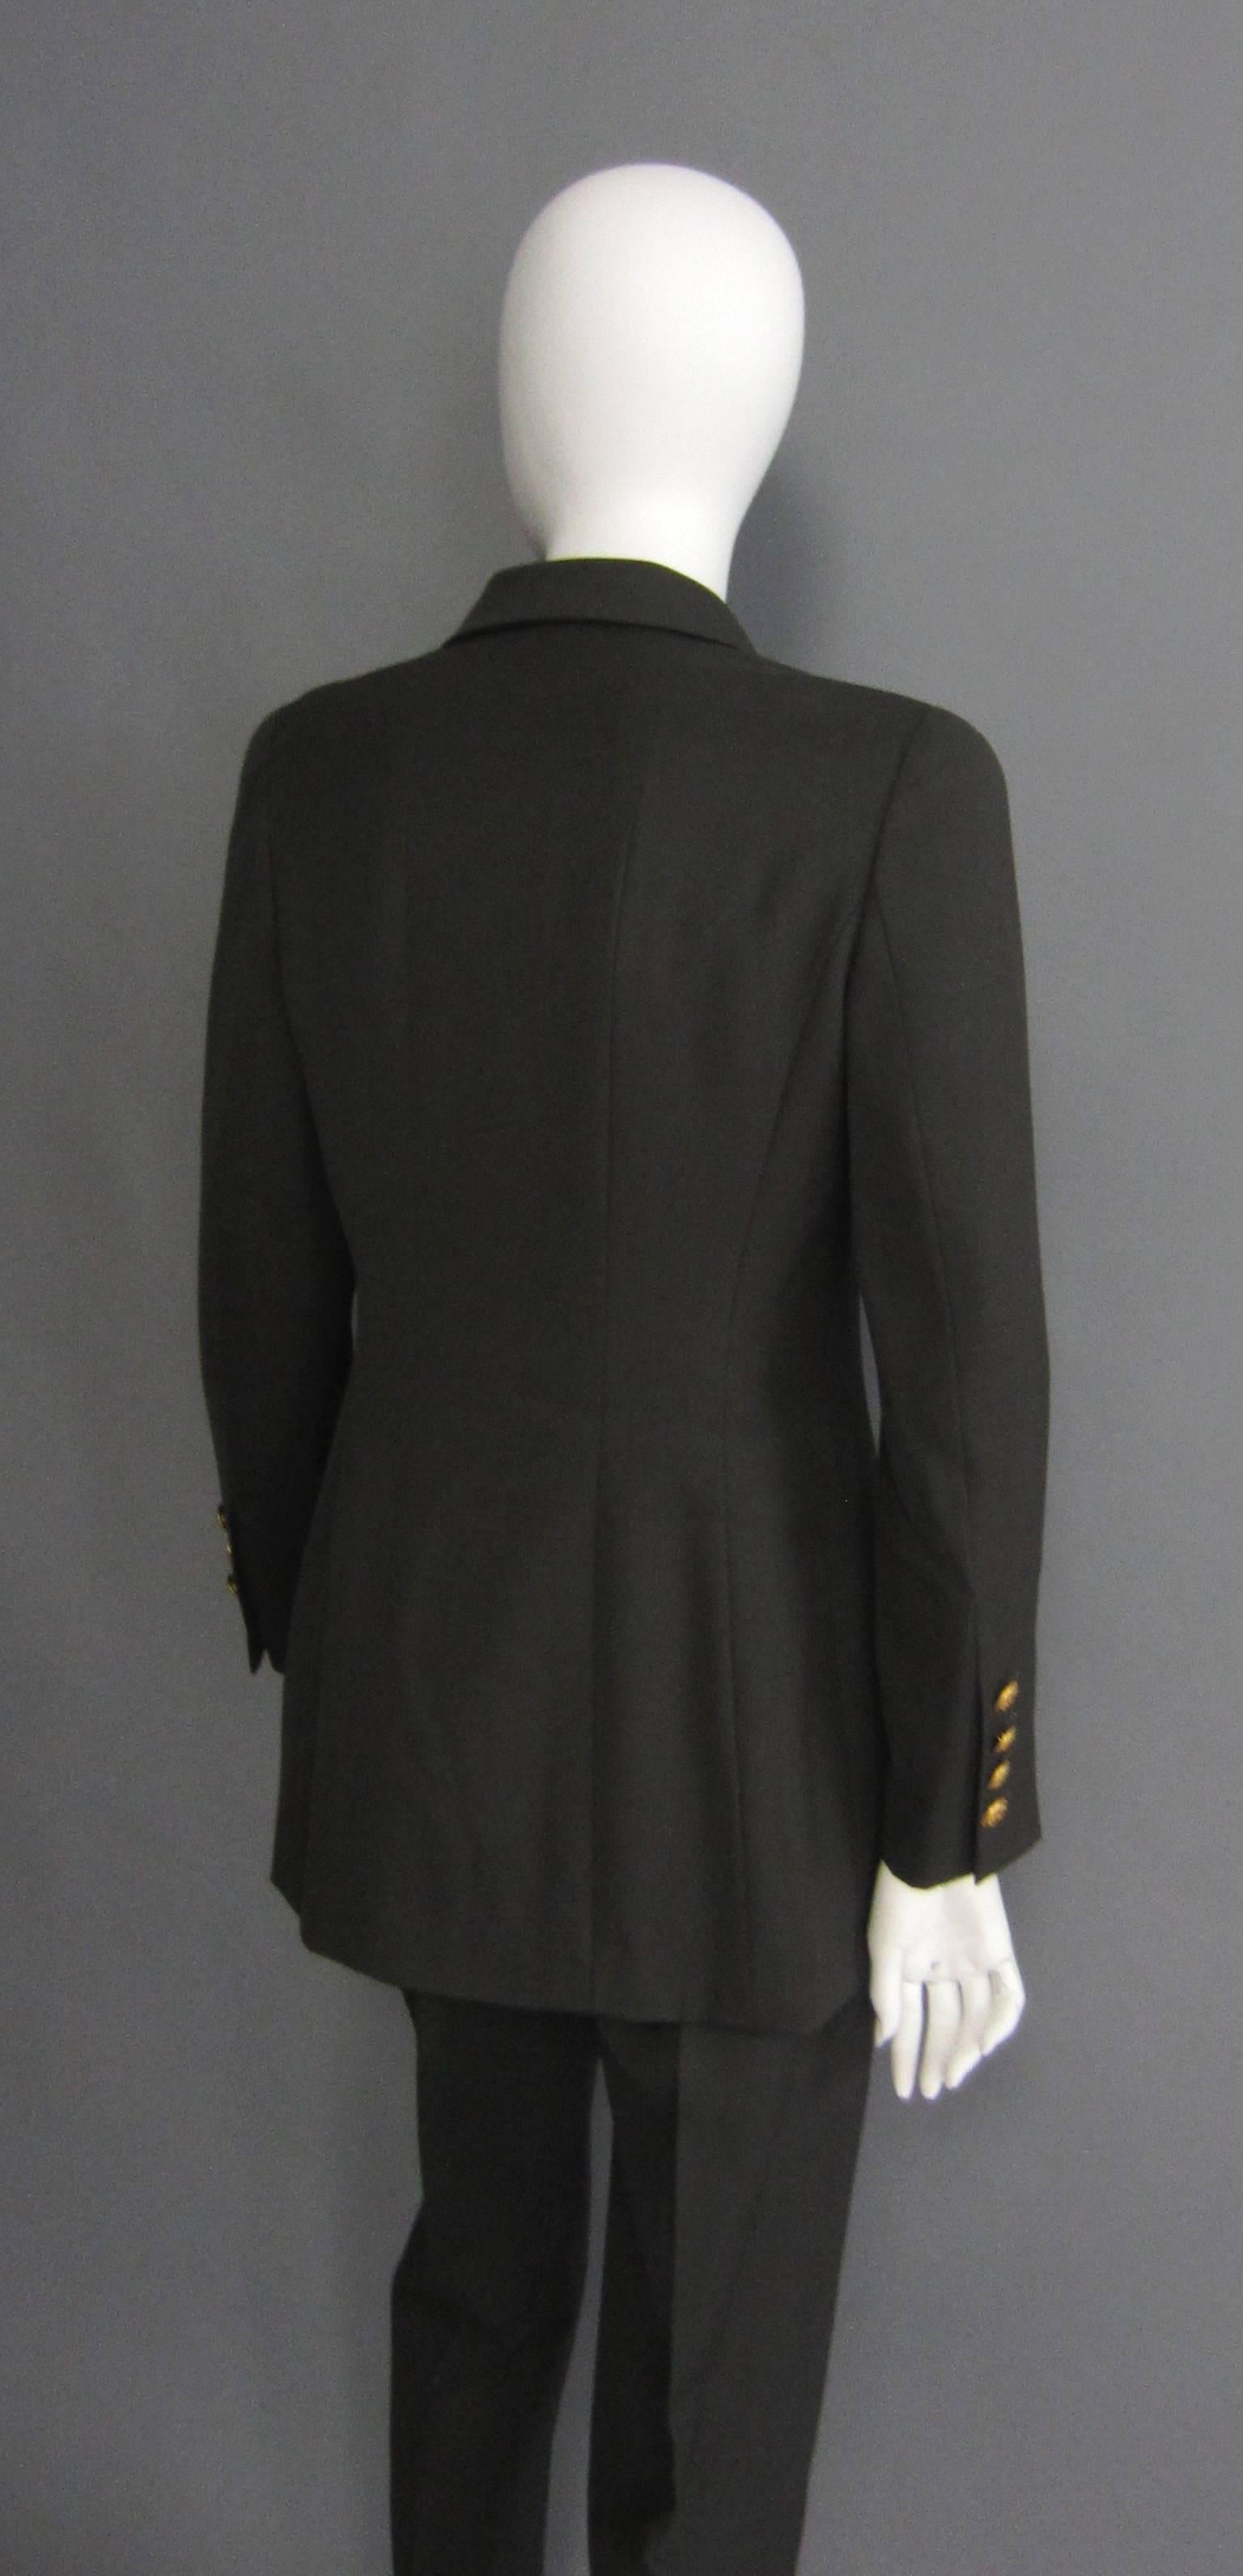 Women's 1996 CHANEL Dark Green Pant Suit with Gold Button Detail For Sale